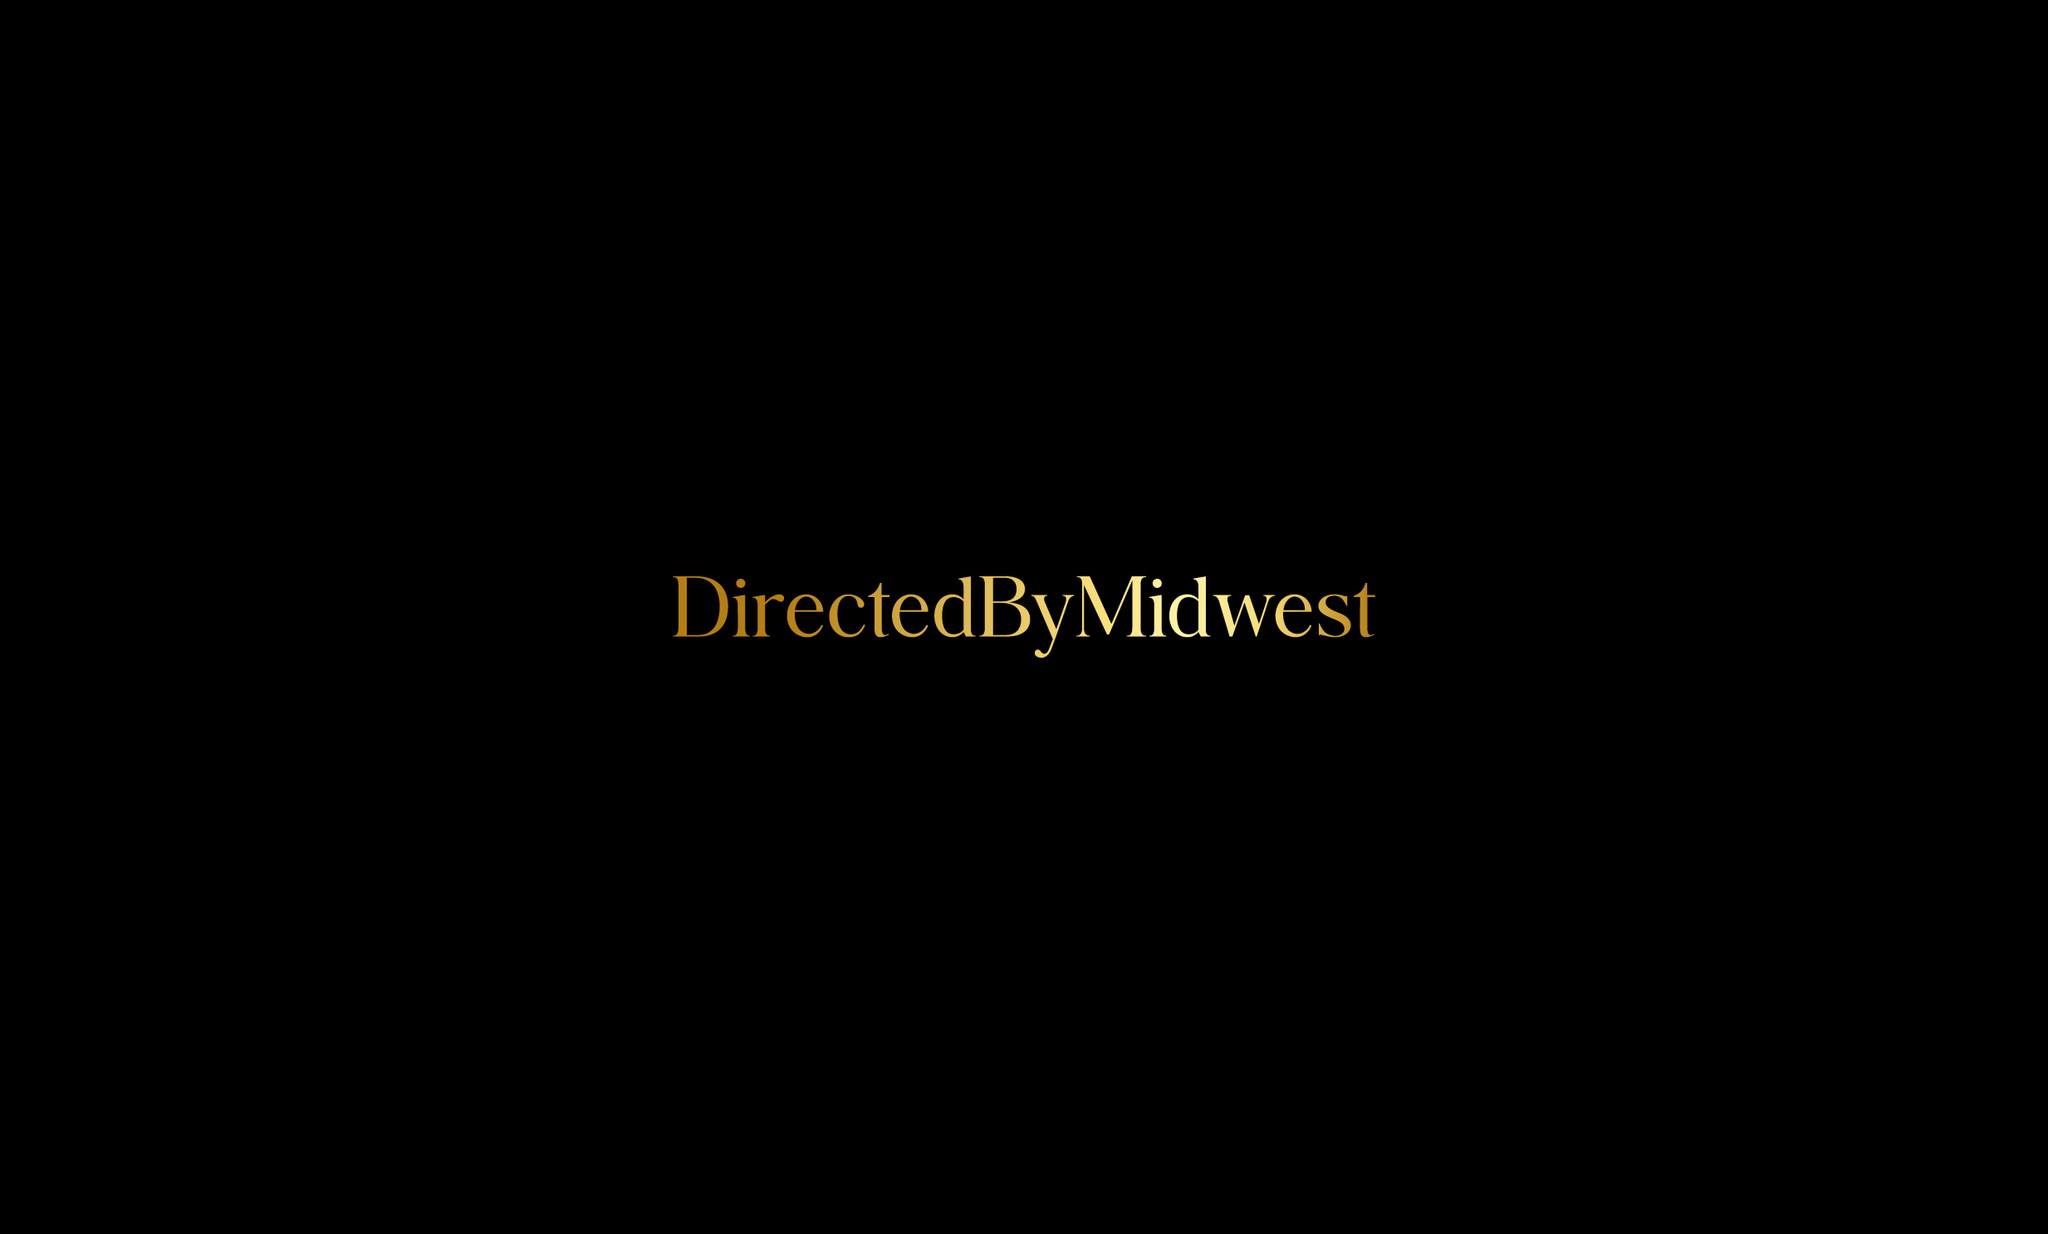 DirectedByMidwest